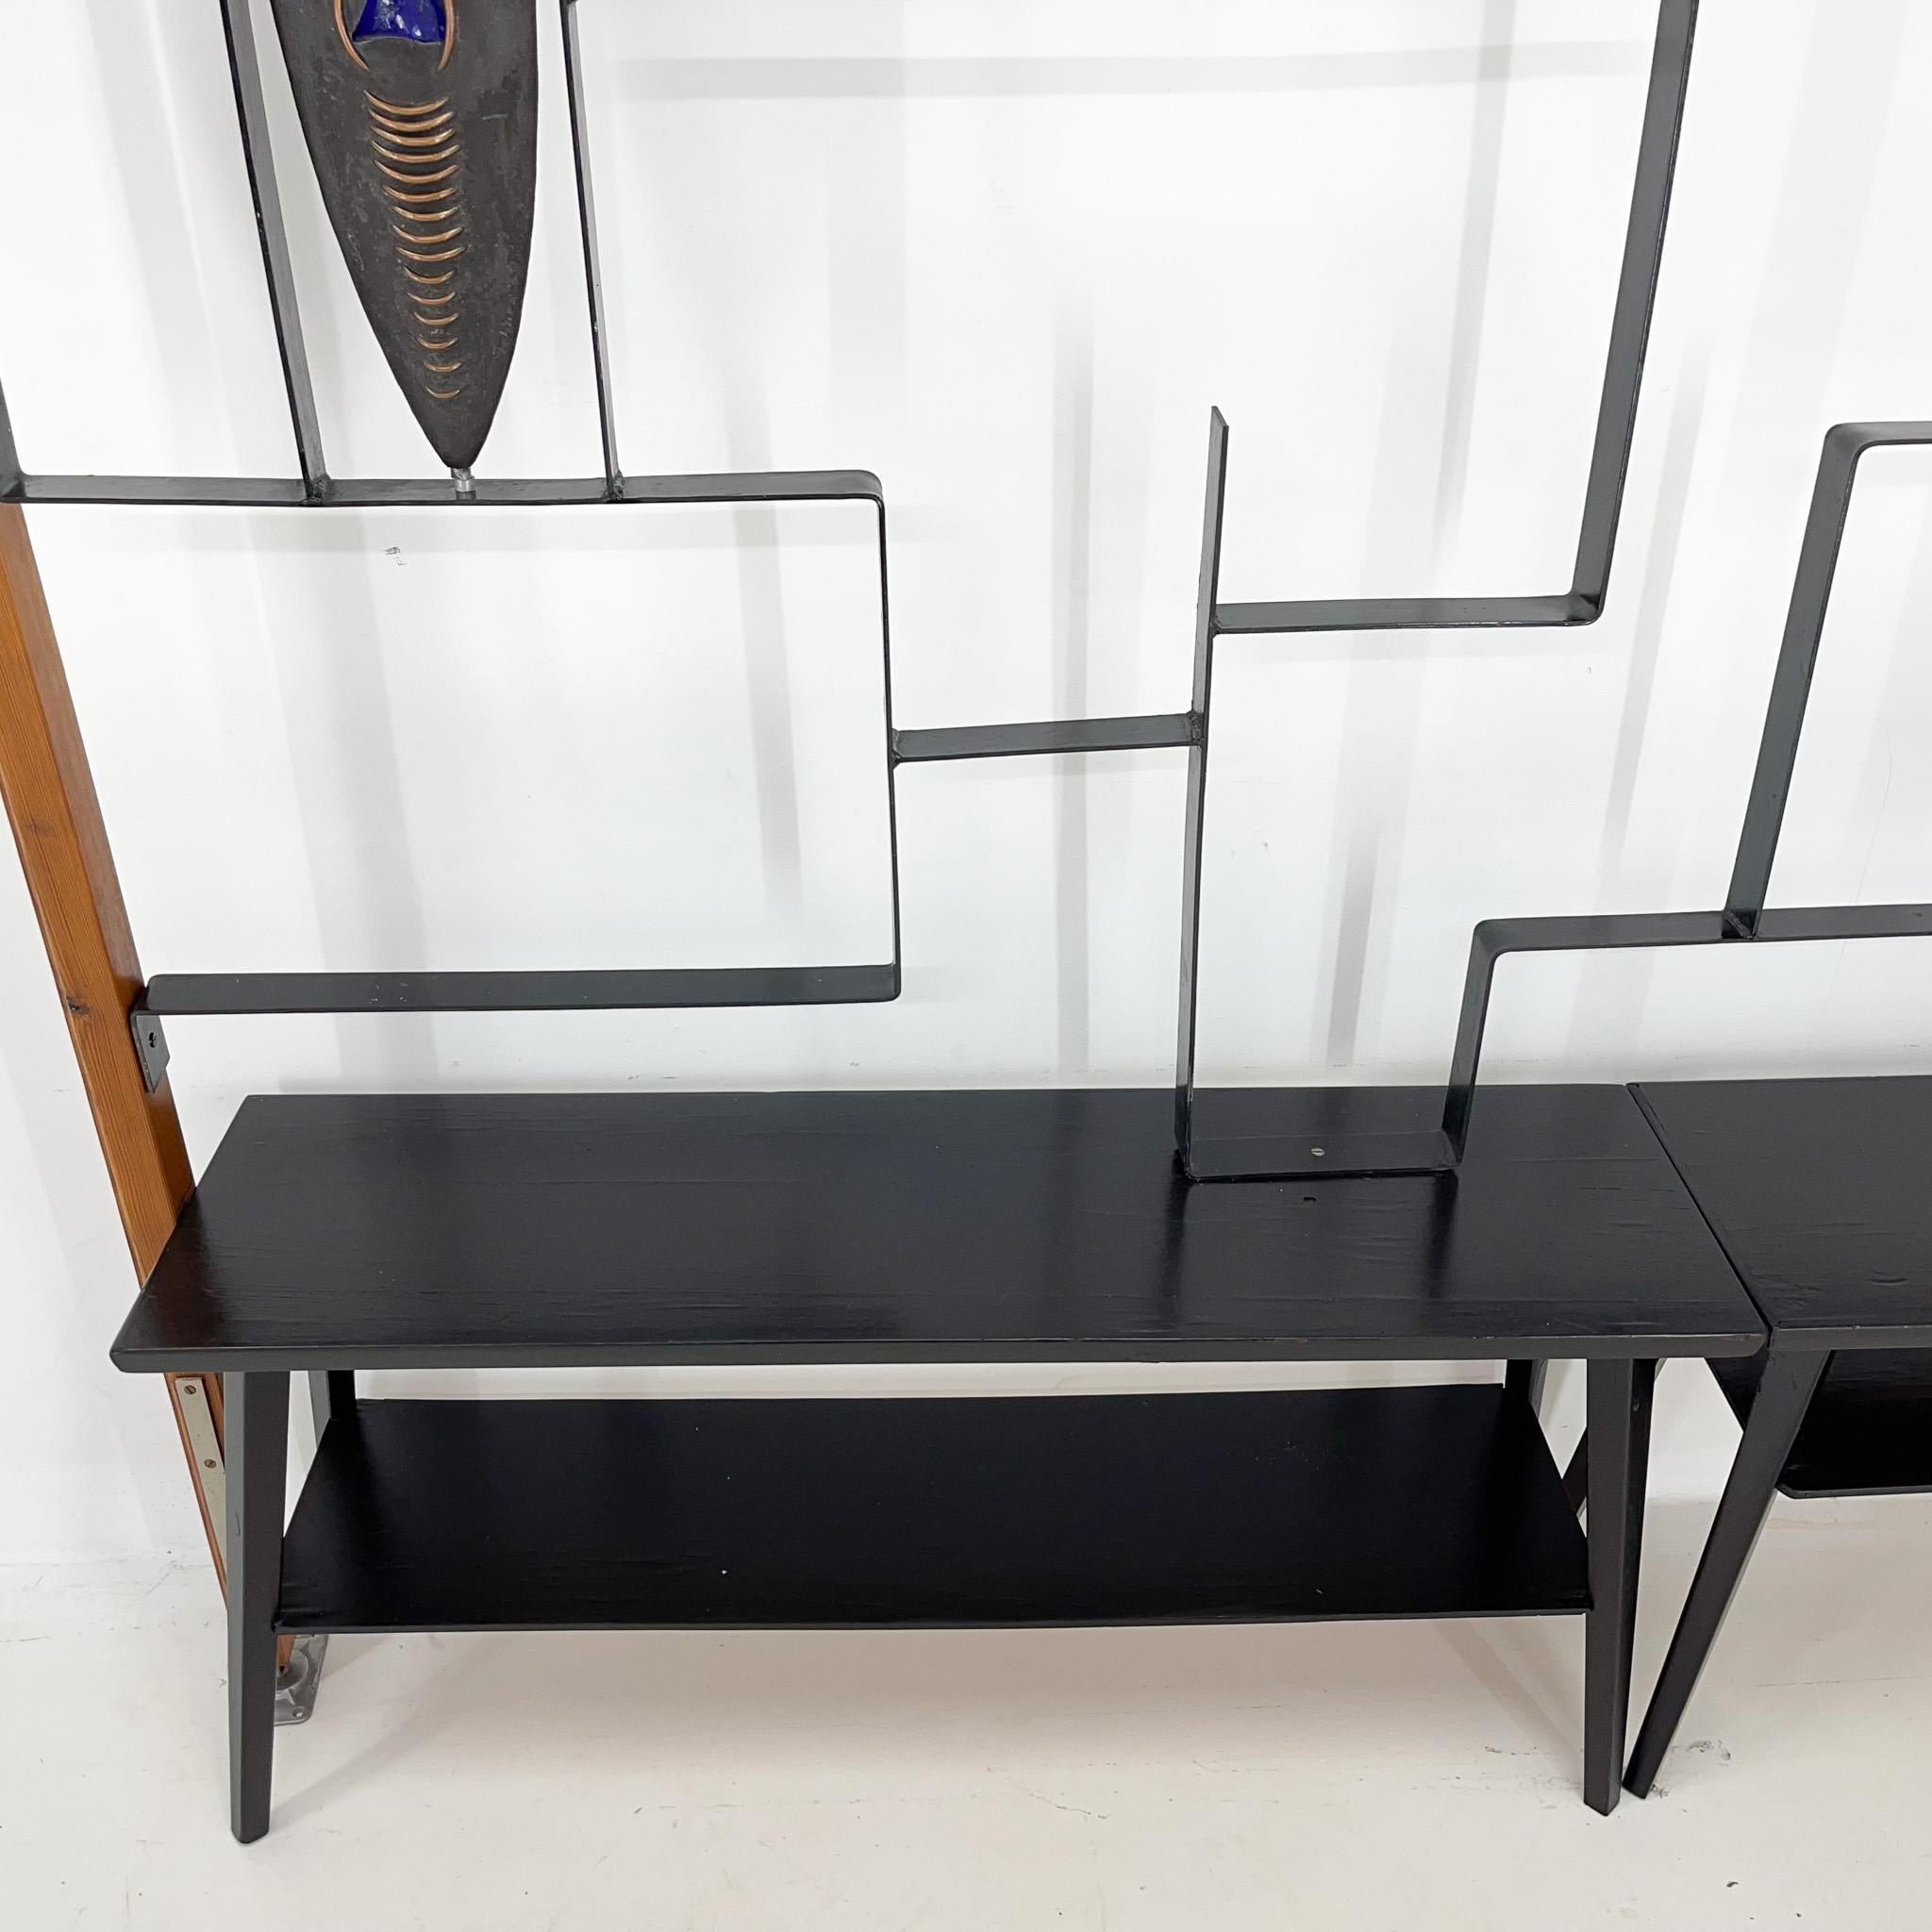 1960's Art Wall Unit or Room Divider with Sculpture by Jelínek For Sale 3